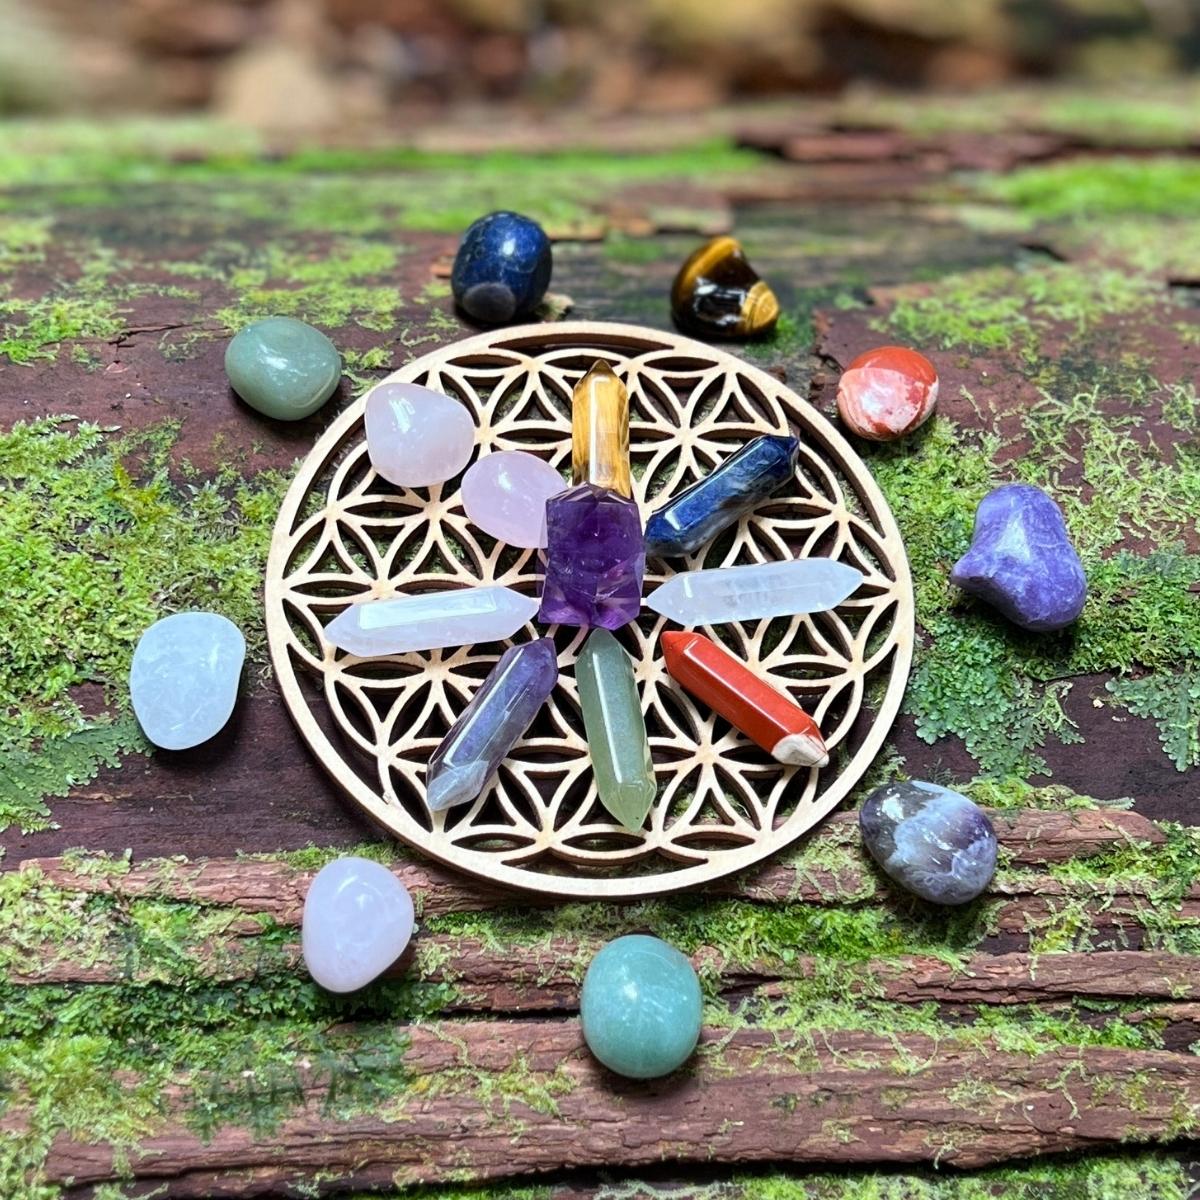 The Flower of Life Crystal Grid is a beautiful and unique piece of hippie-inspired home decor that is perfect for spiritual and mindful living.